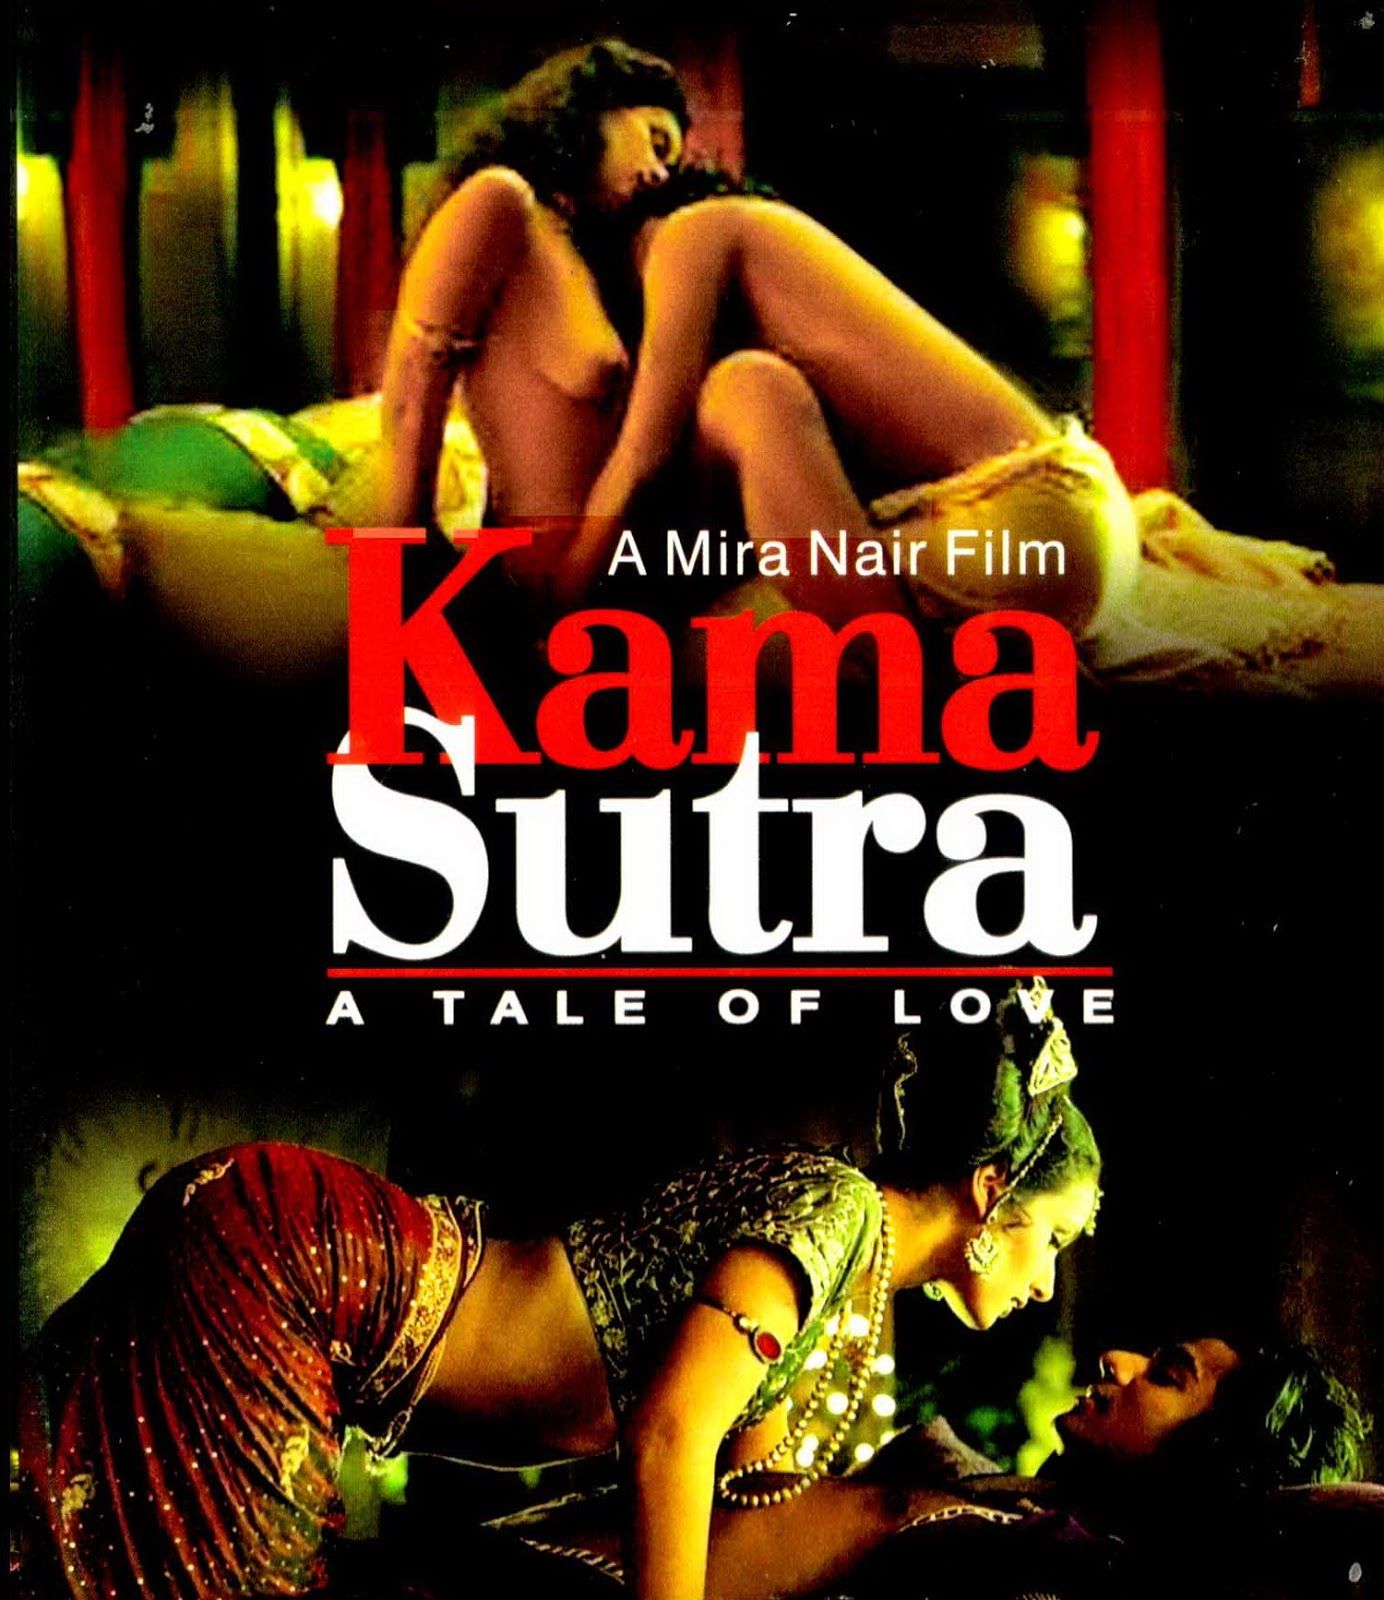 Kama Sutra - A Tale of Love (1996) pic